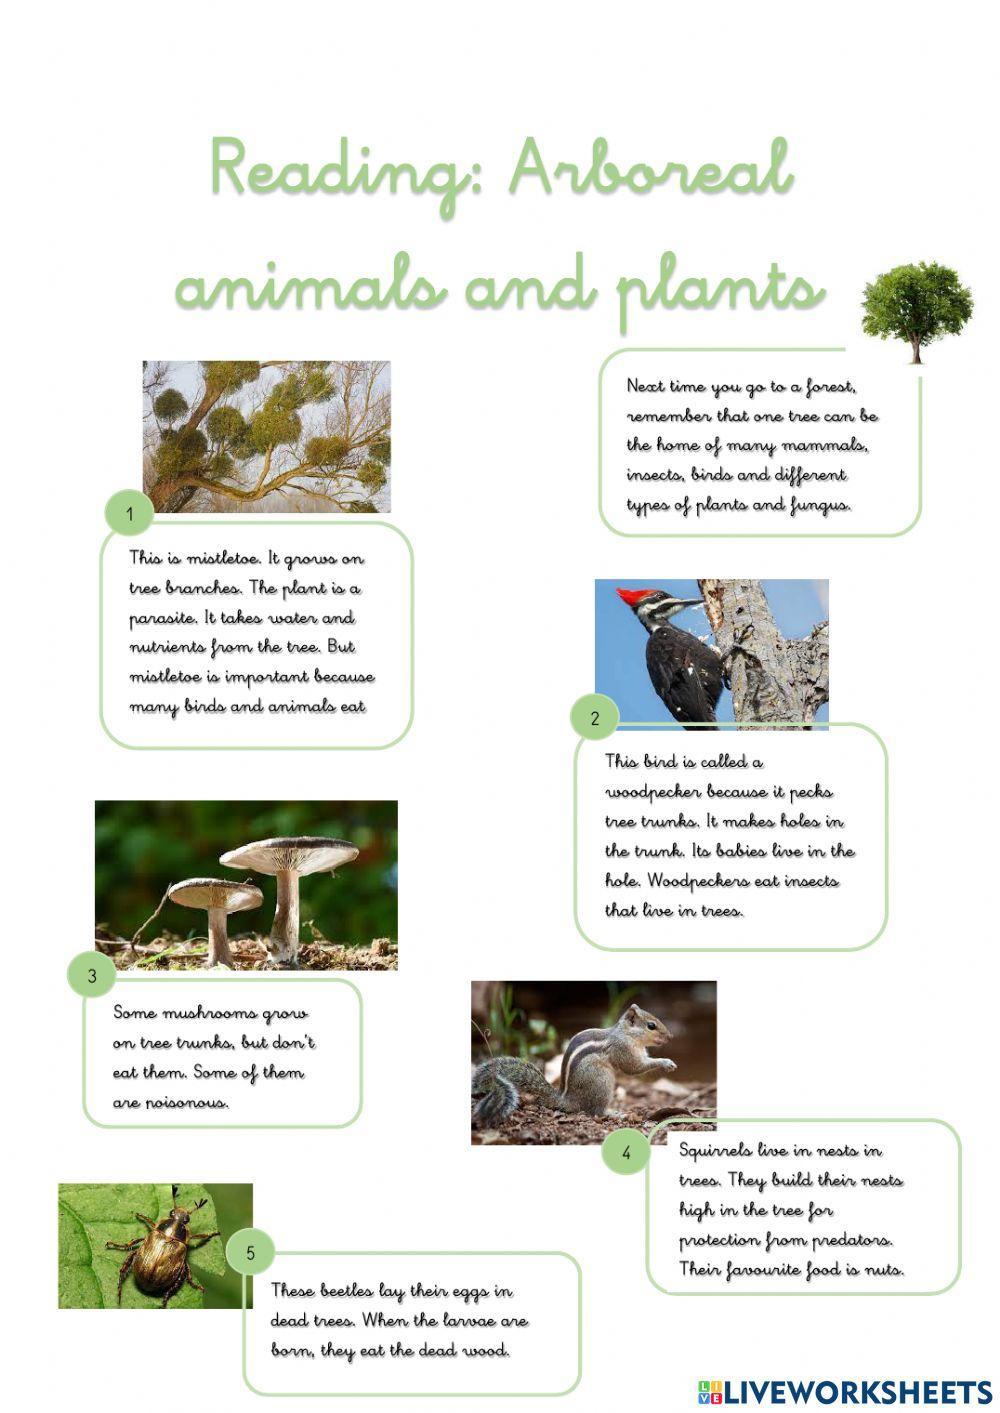 Reading: Arboreal animals and plants